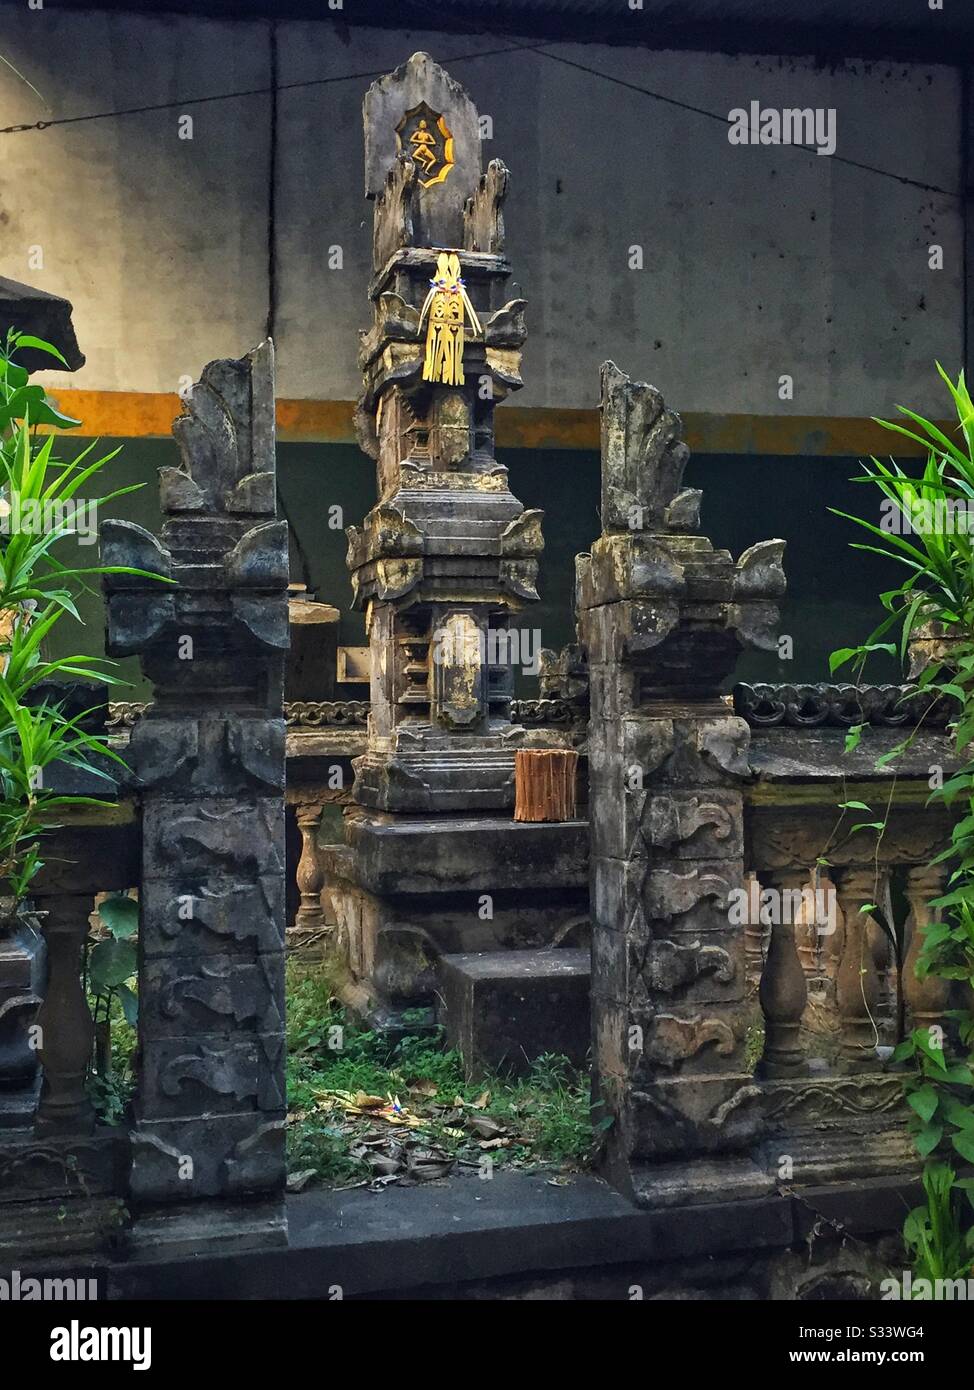 Shrine outside a factory building, Candidasa, Bali, Indonesia Stock Photo